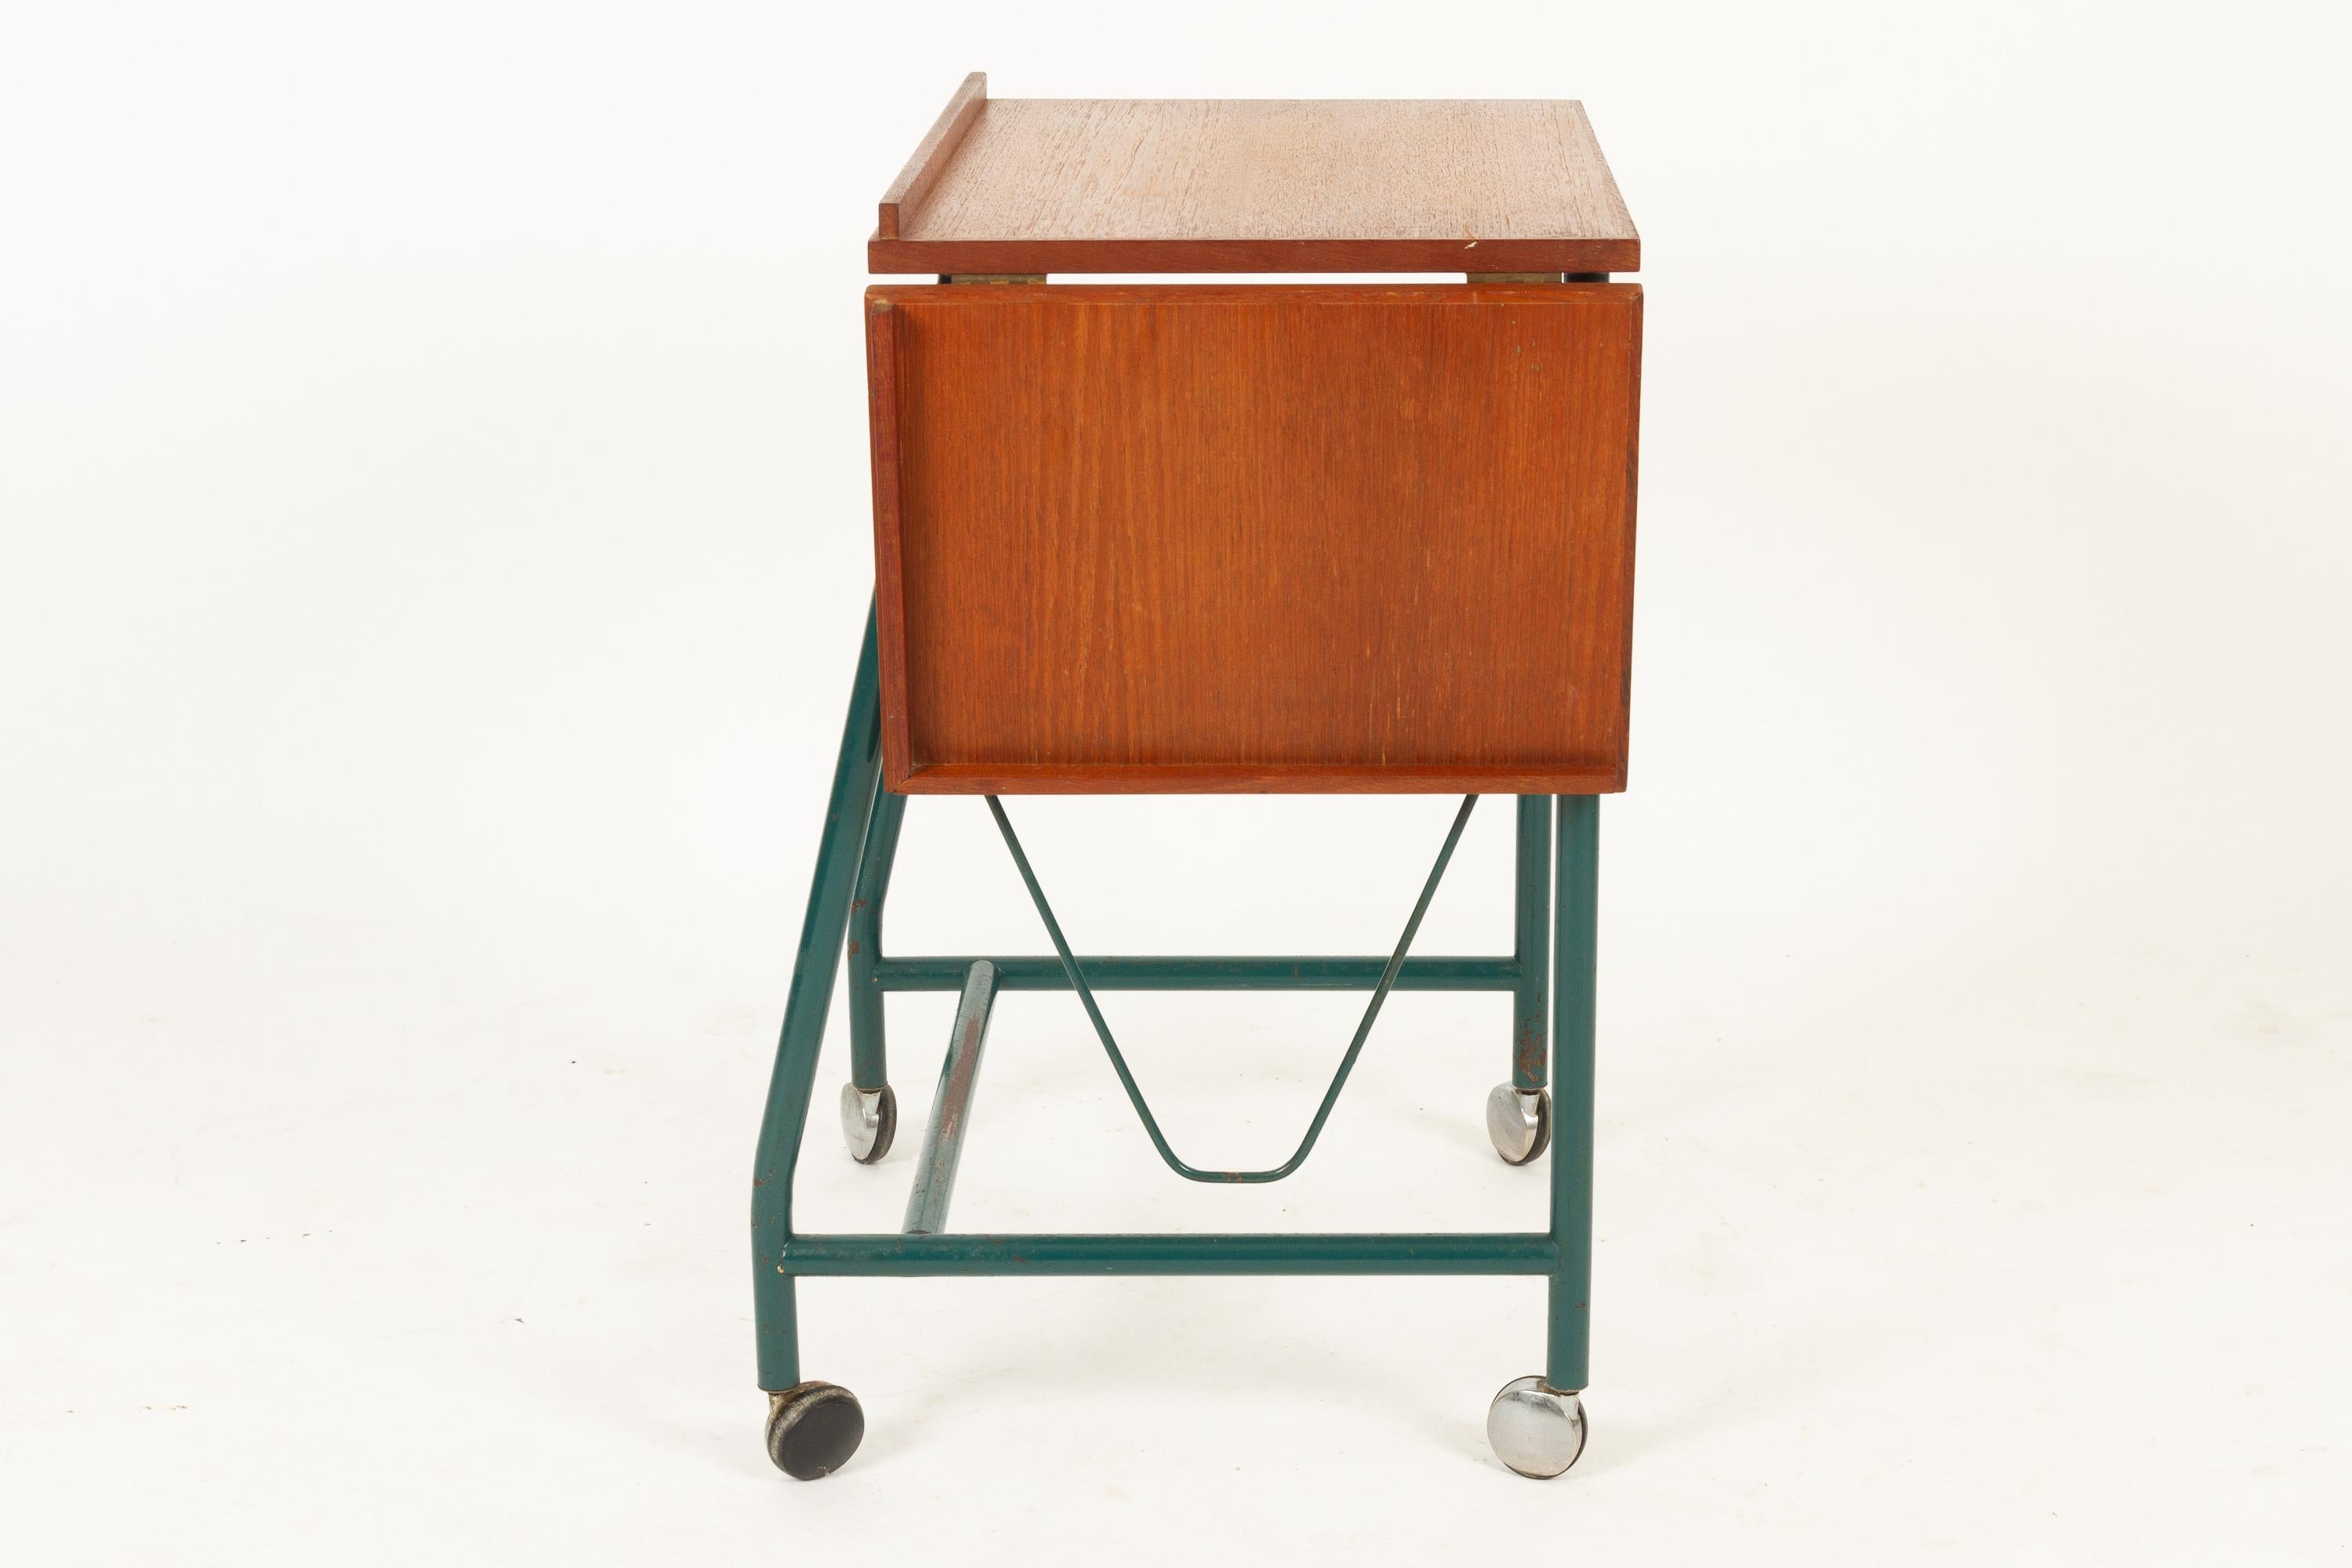 Danish teak side table with green metal frame, 1960s

Vintage Danish trolley with teak tabletop, green metal frame on wheels. Table has a hinged extension blade. Originally probably used as a typewriter desk.
Versatile piece of Mid-Century Modern